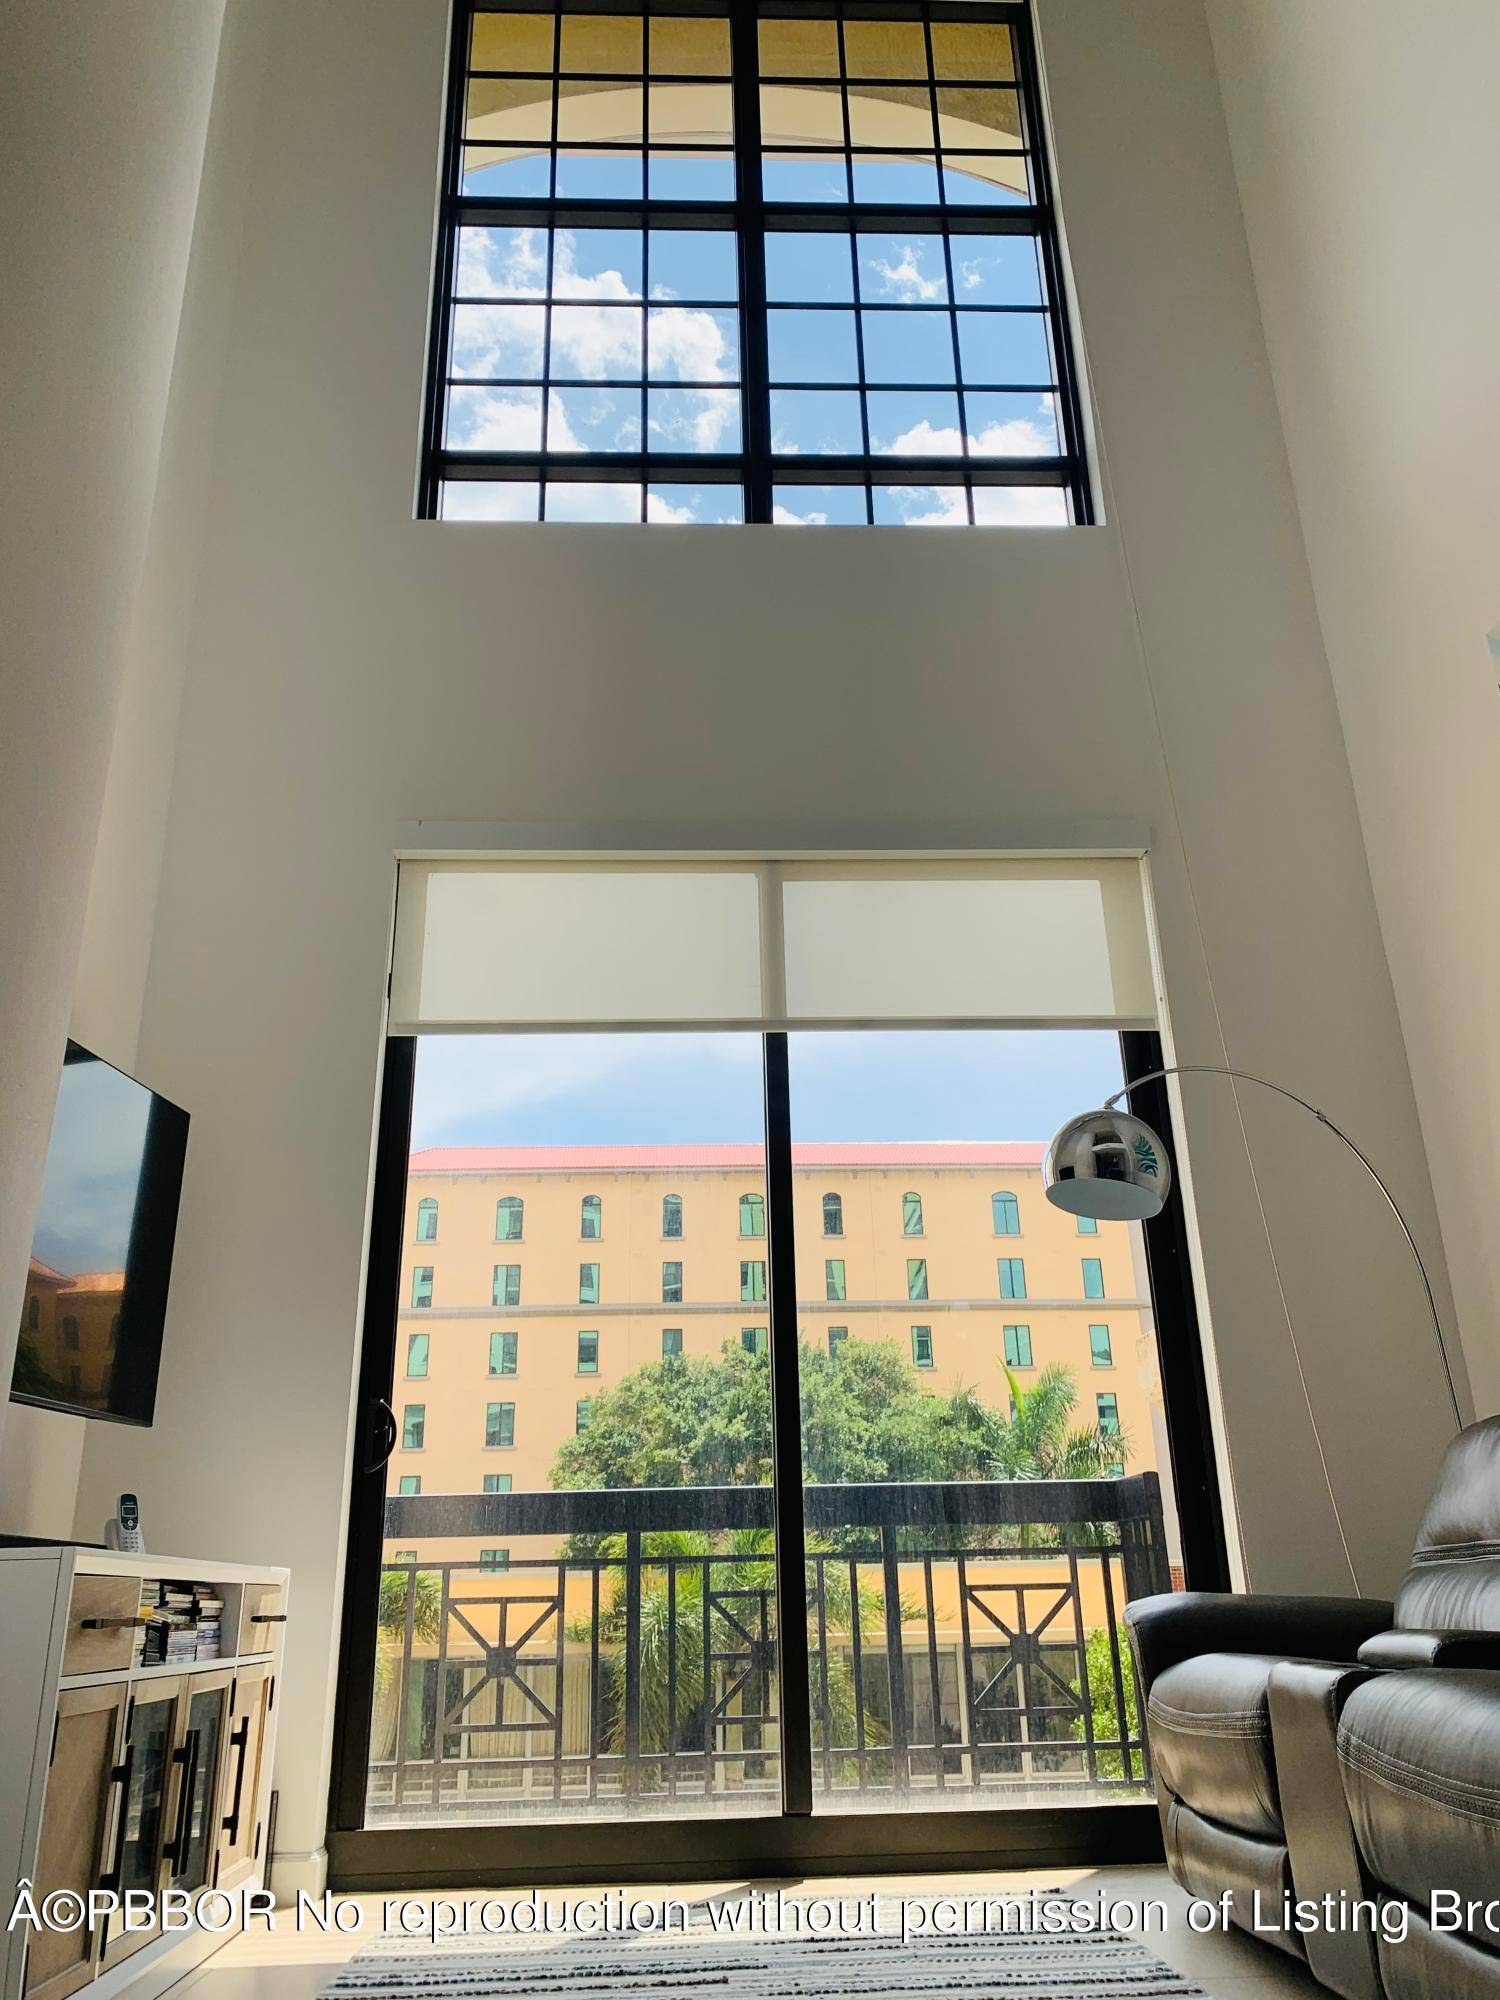 Can you imagine waking up everyday in your own elegant, downtown loft ; enjoying your mornings watching the sun rise over the rooftop pool while having coffee or a mimosa ...